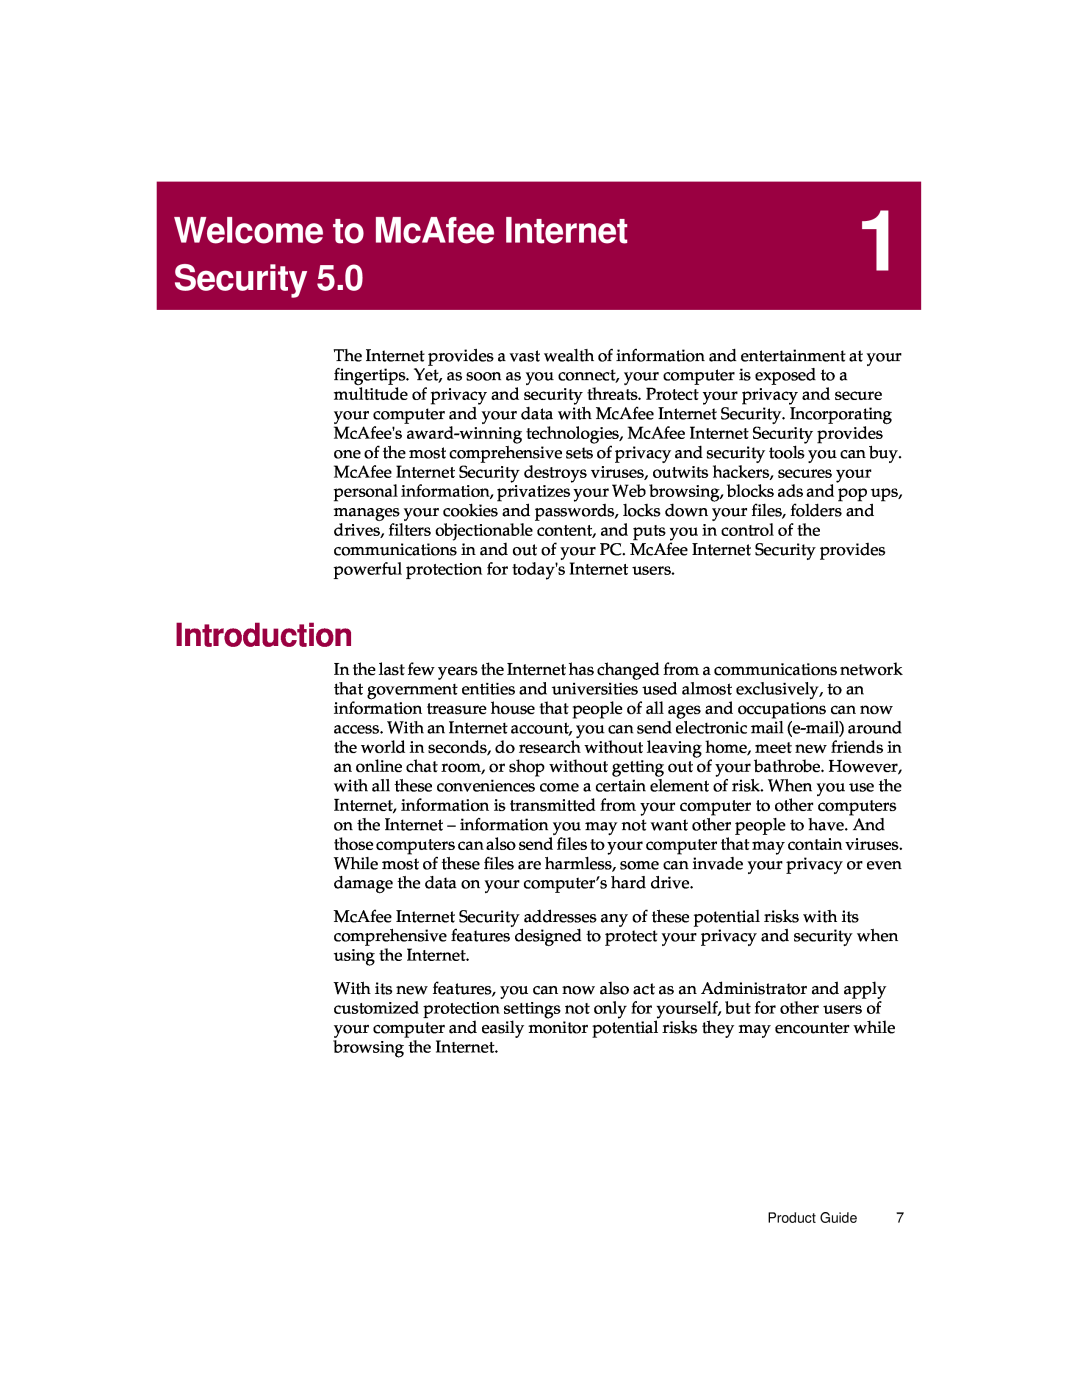 McAfee 5 manual Welcome to McAfee Internet, Security, Introduction 